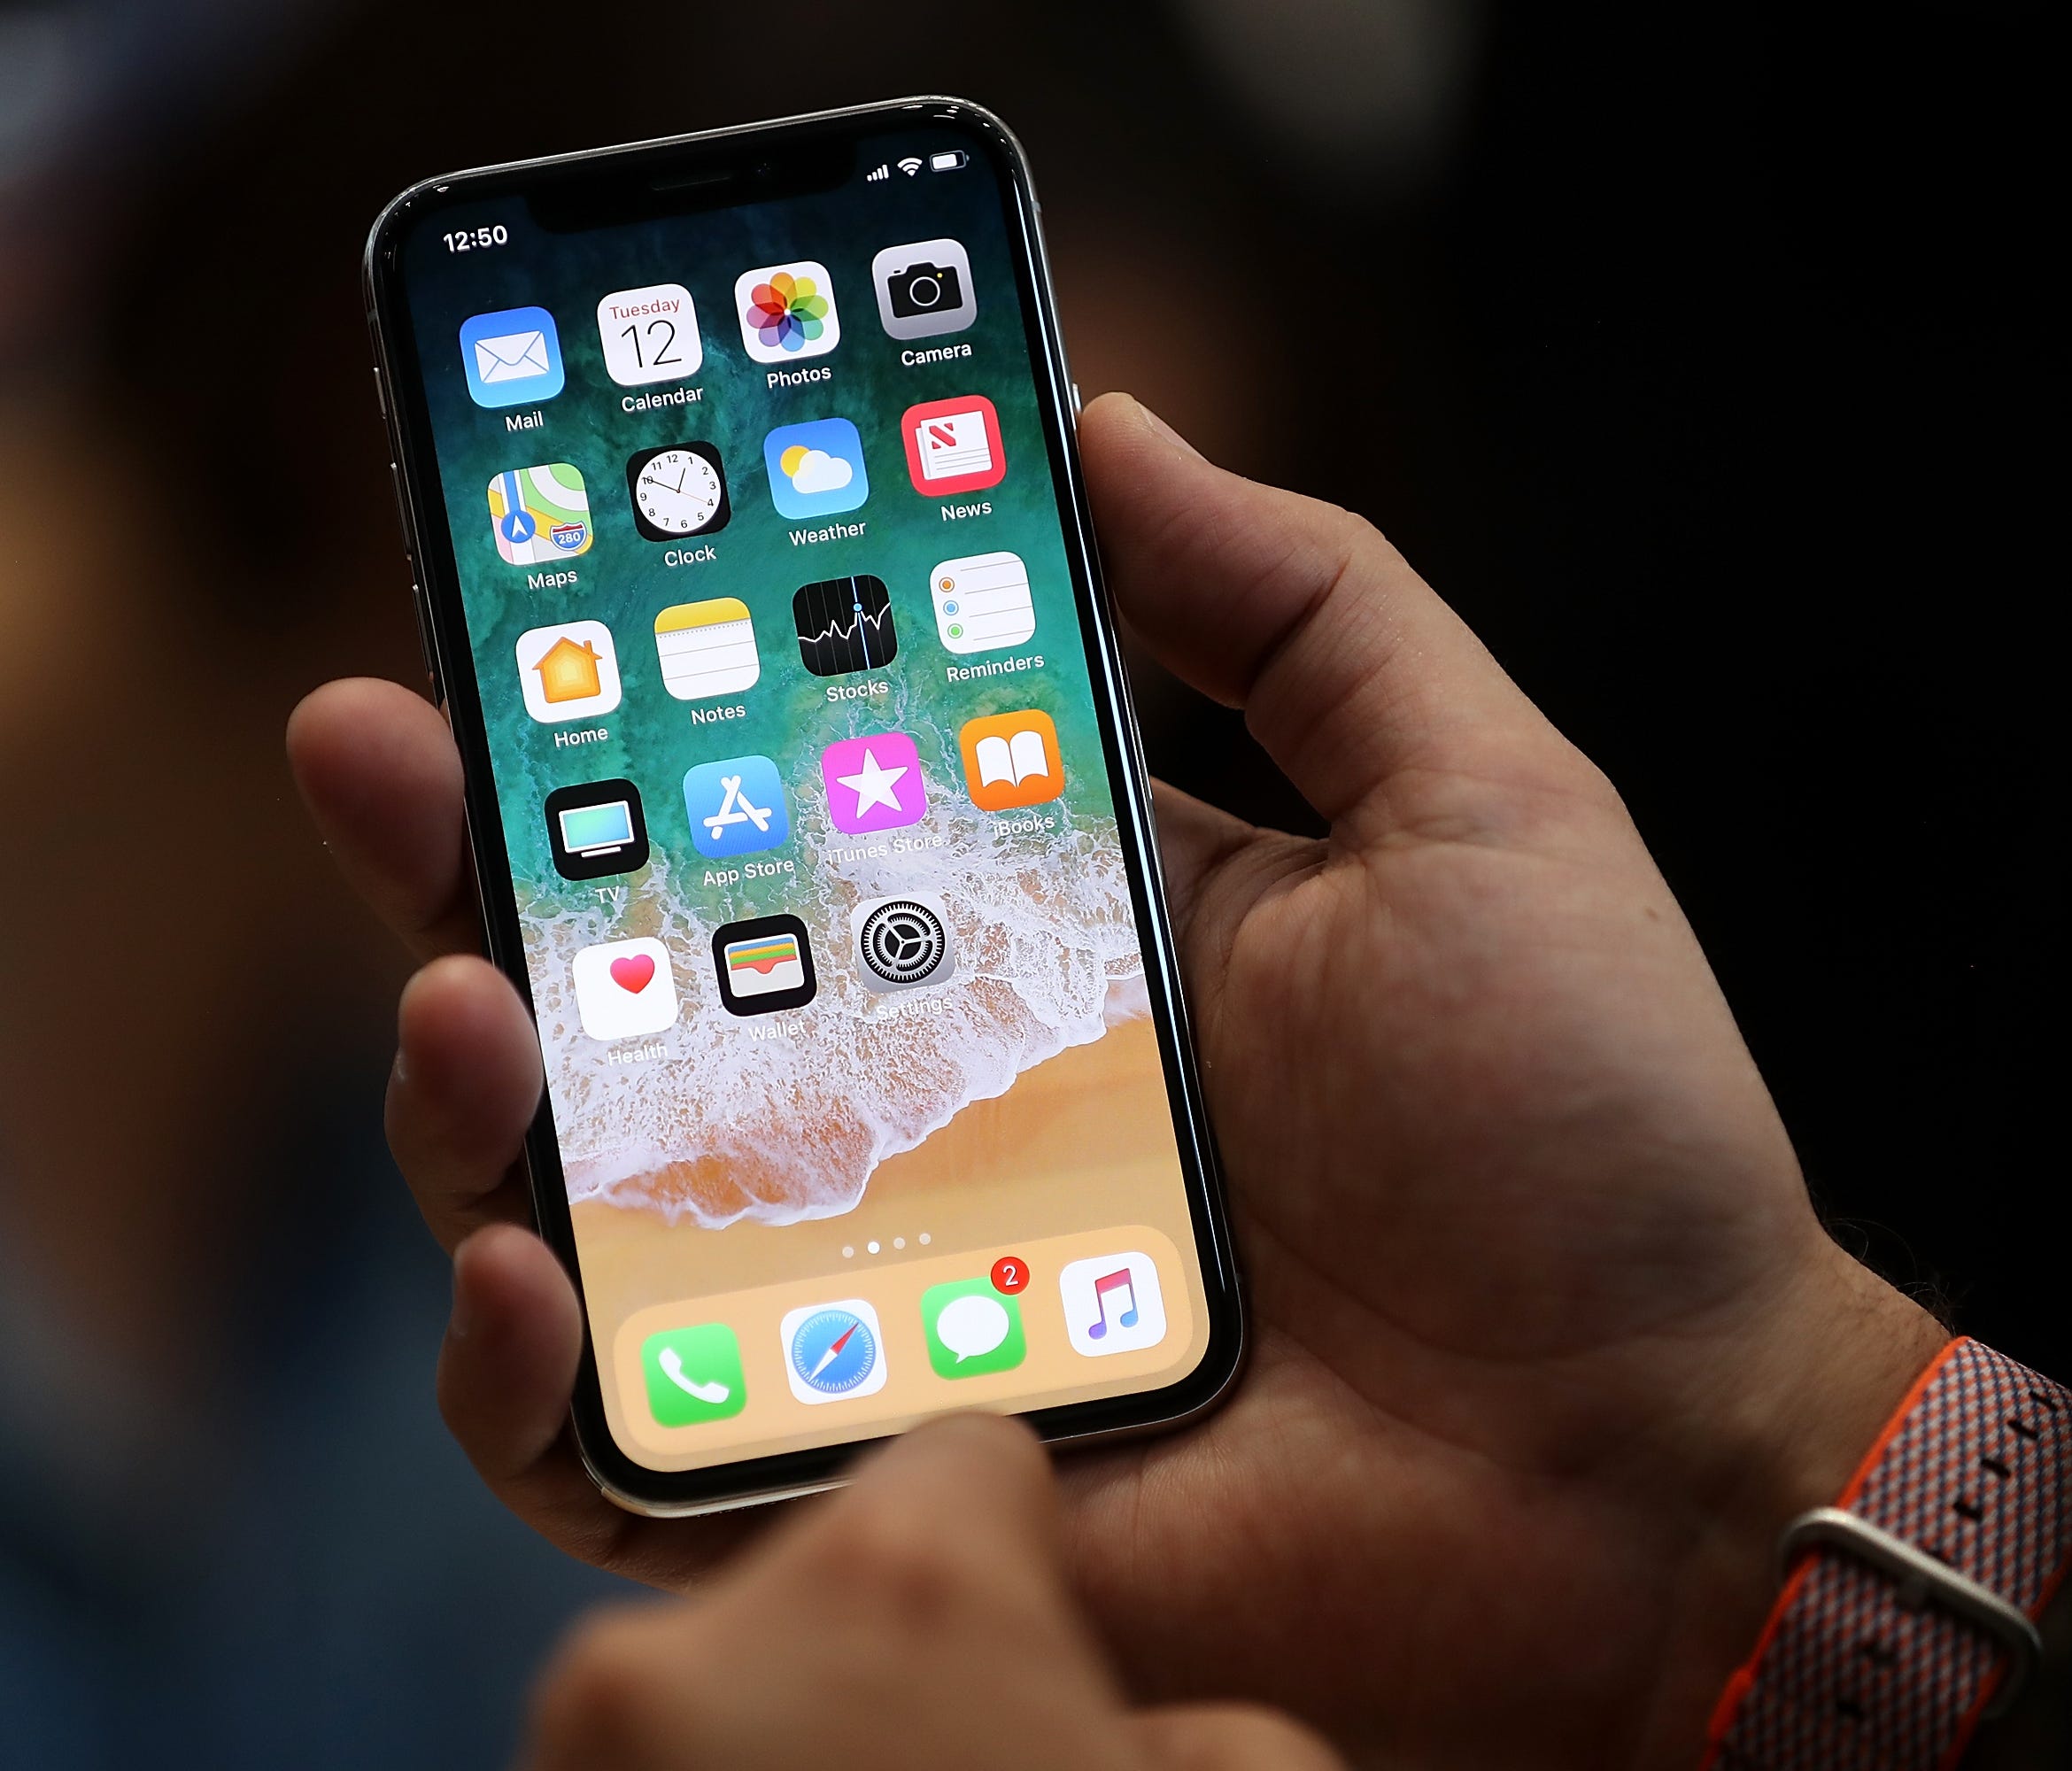 The new iPhone X is displayed during an Apple special event at the Steve Jobs Theatre on the Apple Park campus on September 12, 2017 in Cupertino, California. Apple held their first special event at the new Apple Park campus where they announced the 